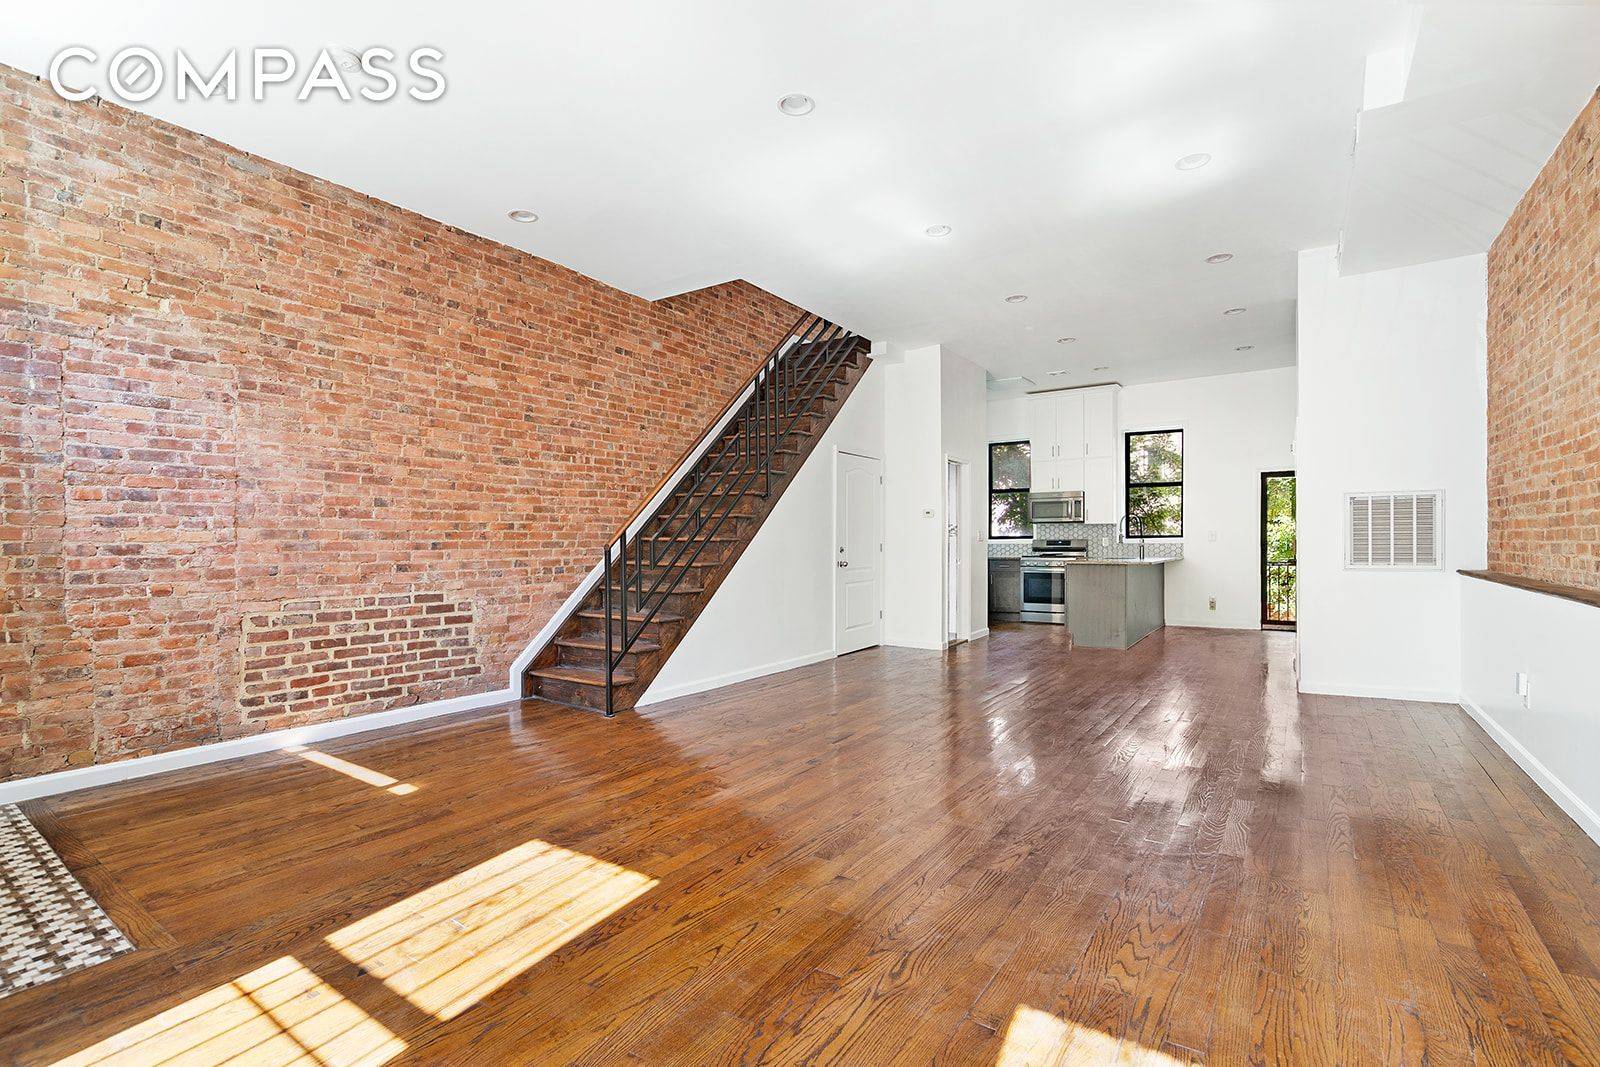 There is no shortage of space here at 131 Decatur Street.